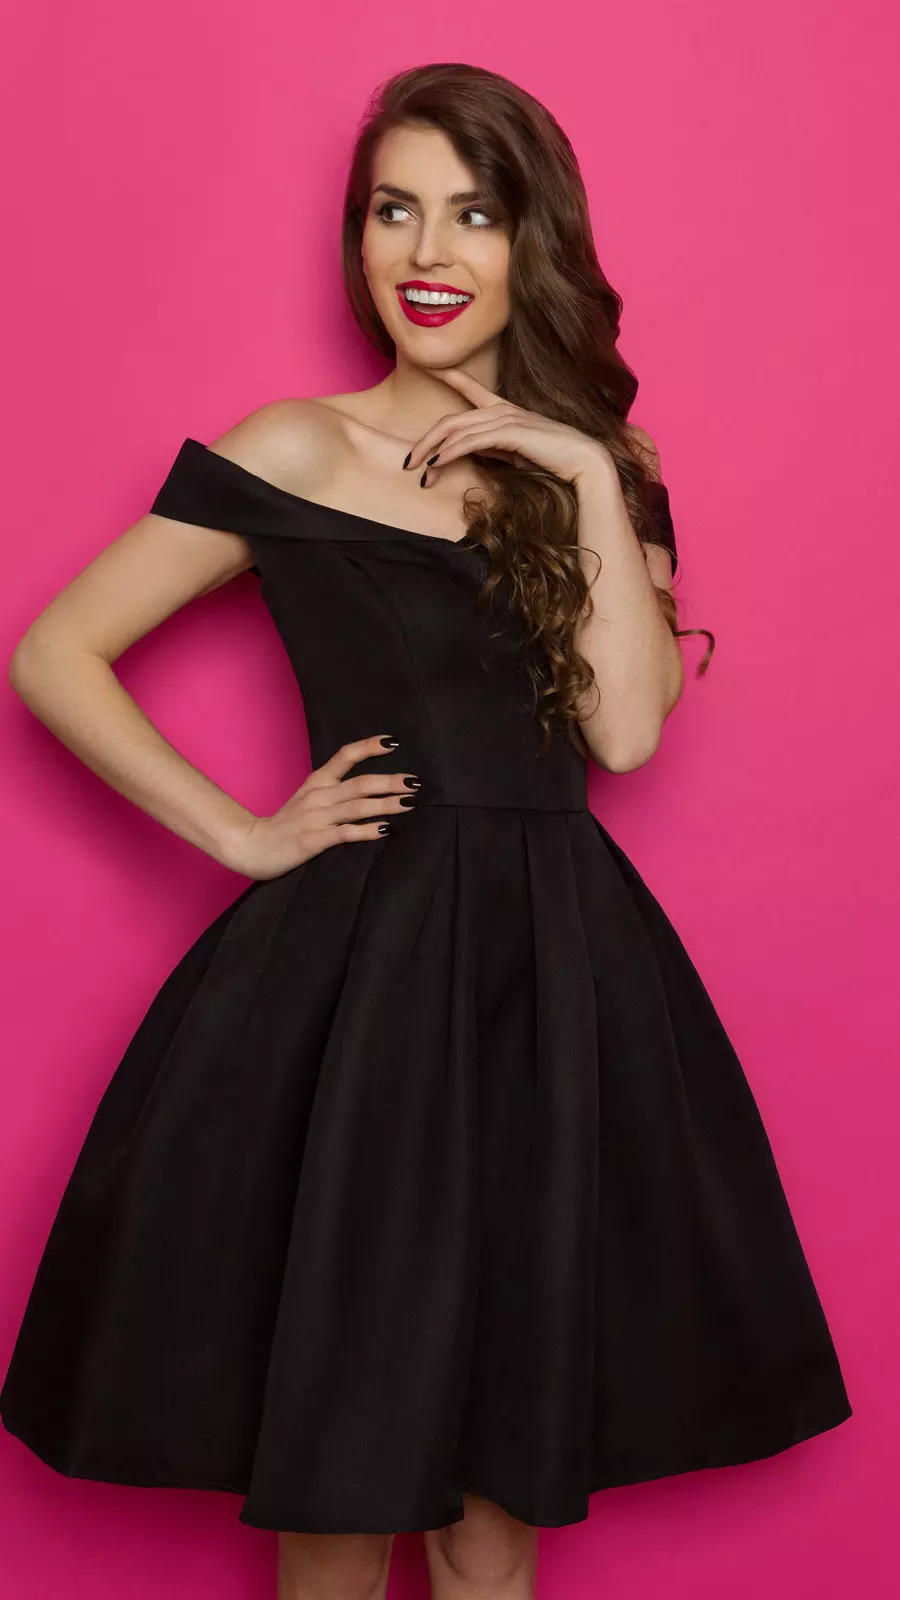 black dress: Every girl should have these Black outfits in her